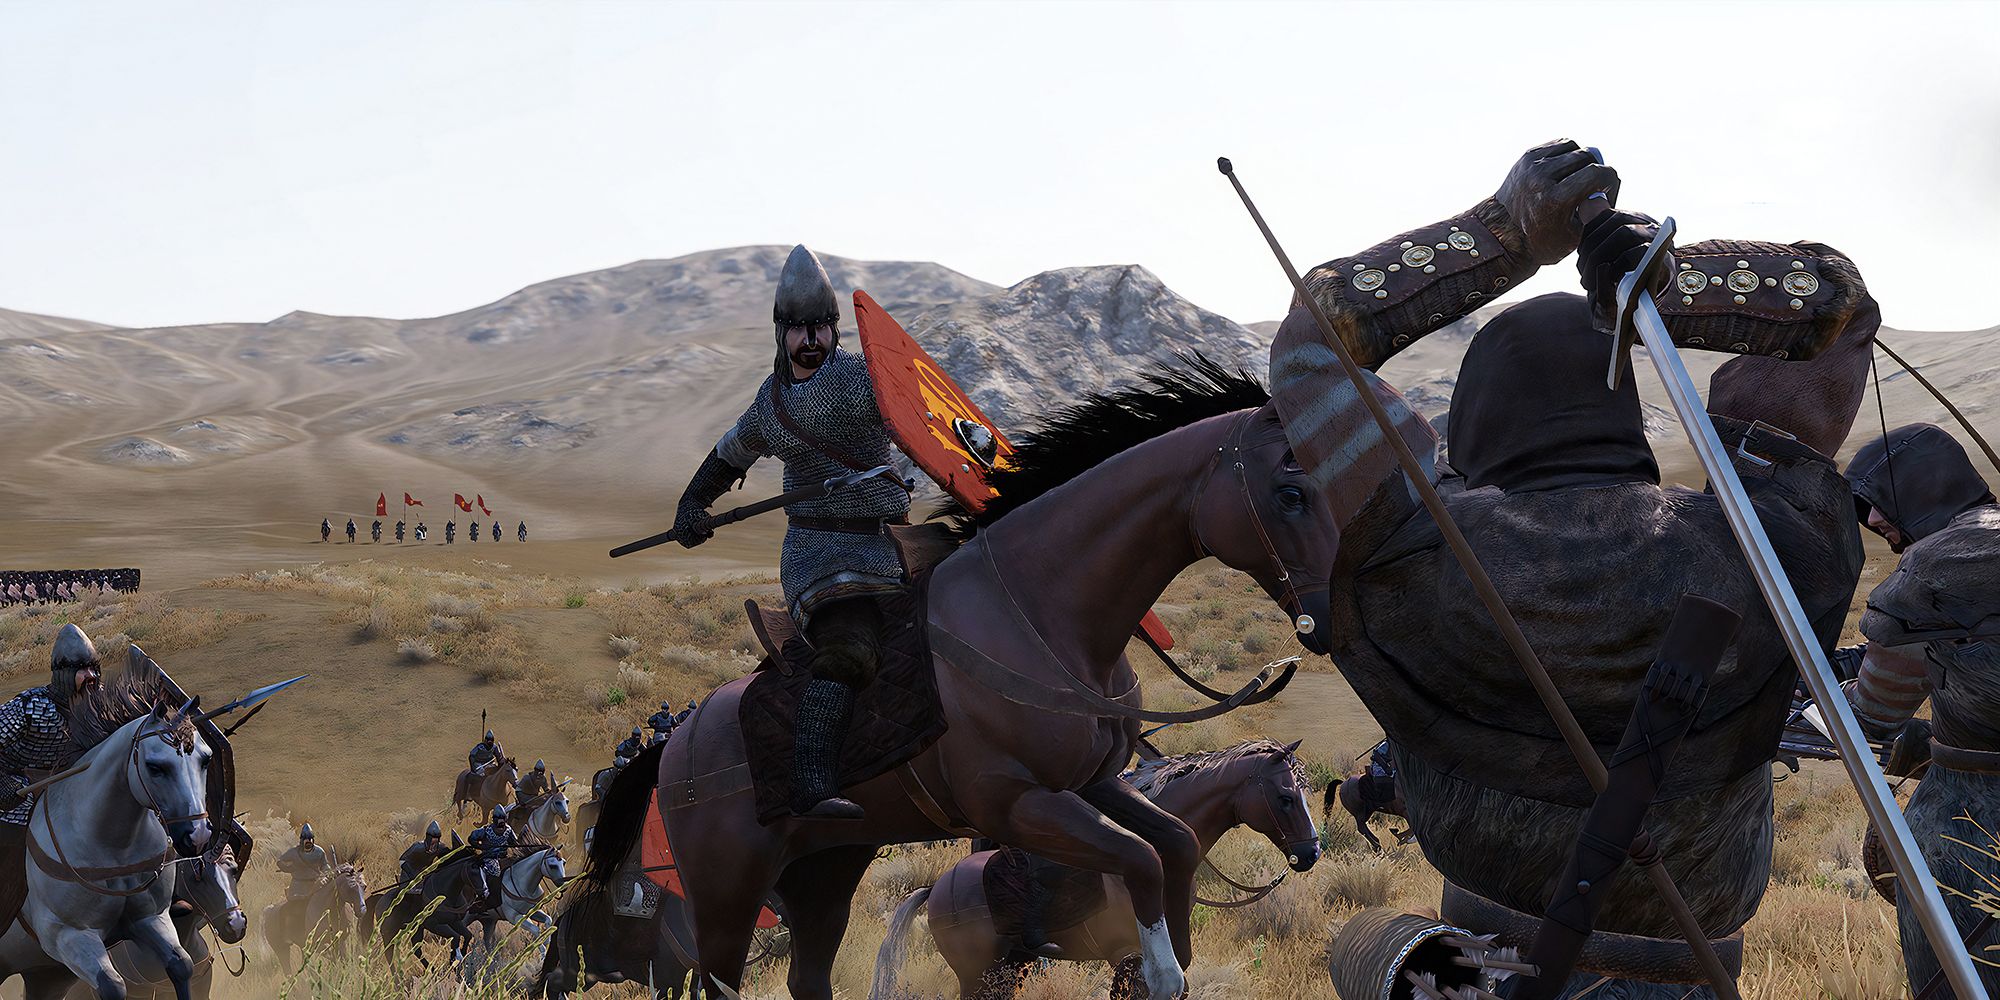 A swordsman fighting a cavalry in the midst of a battle in the hills